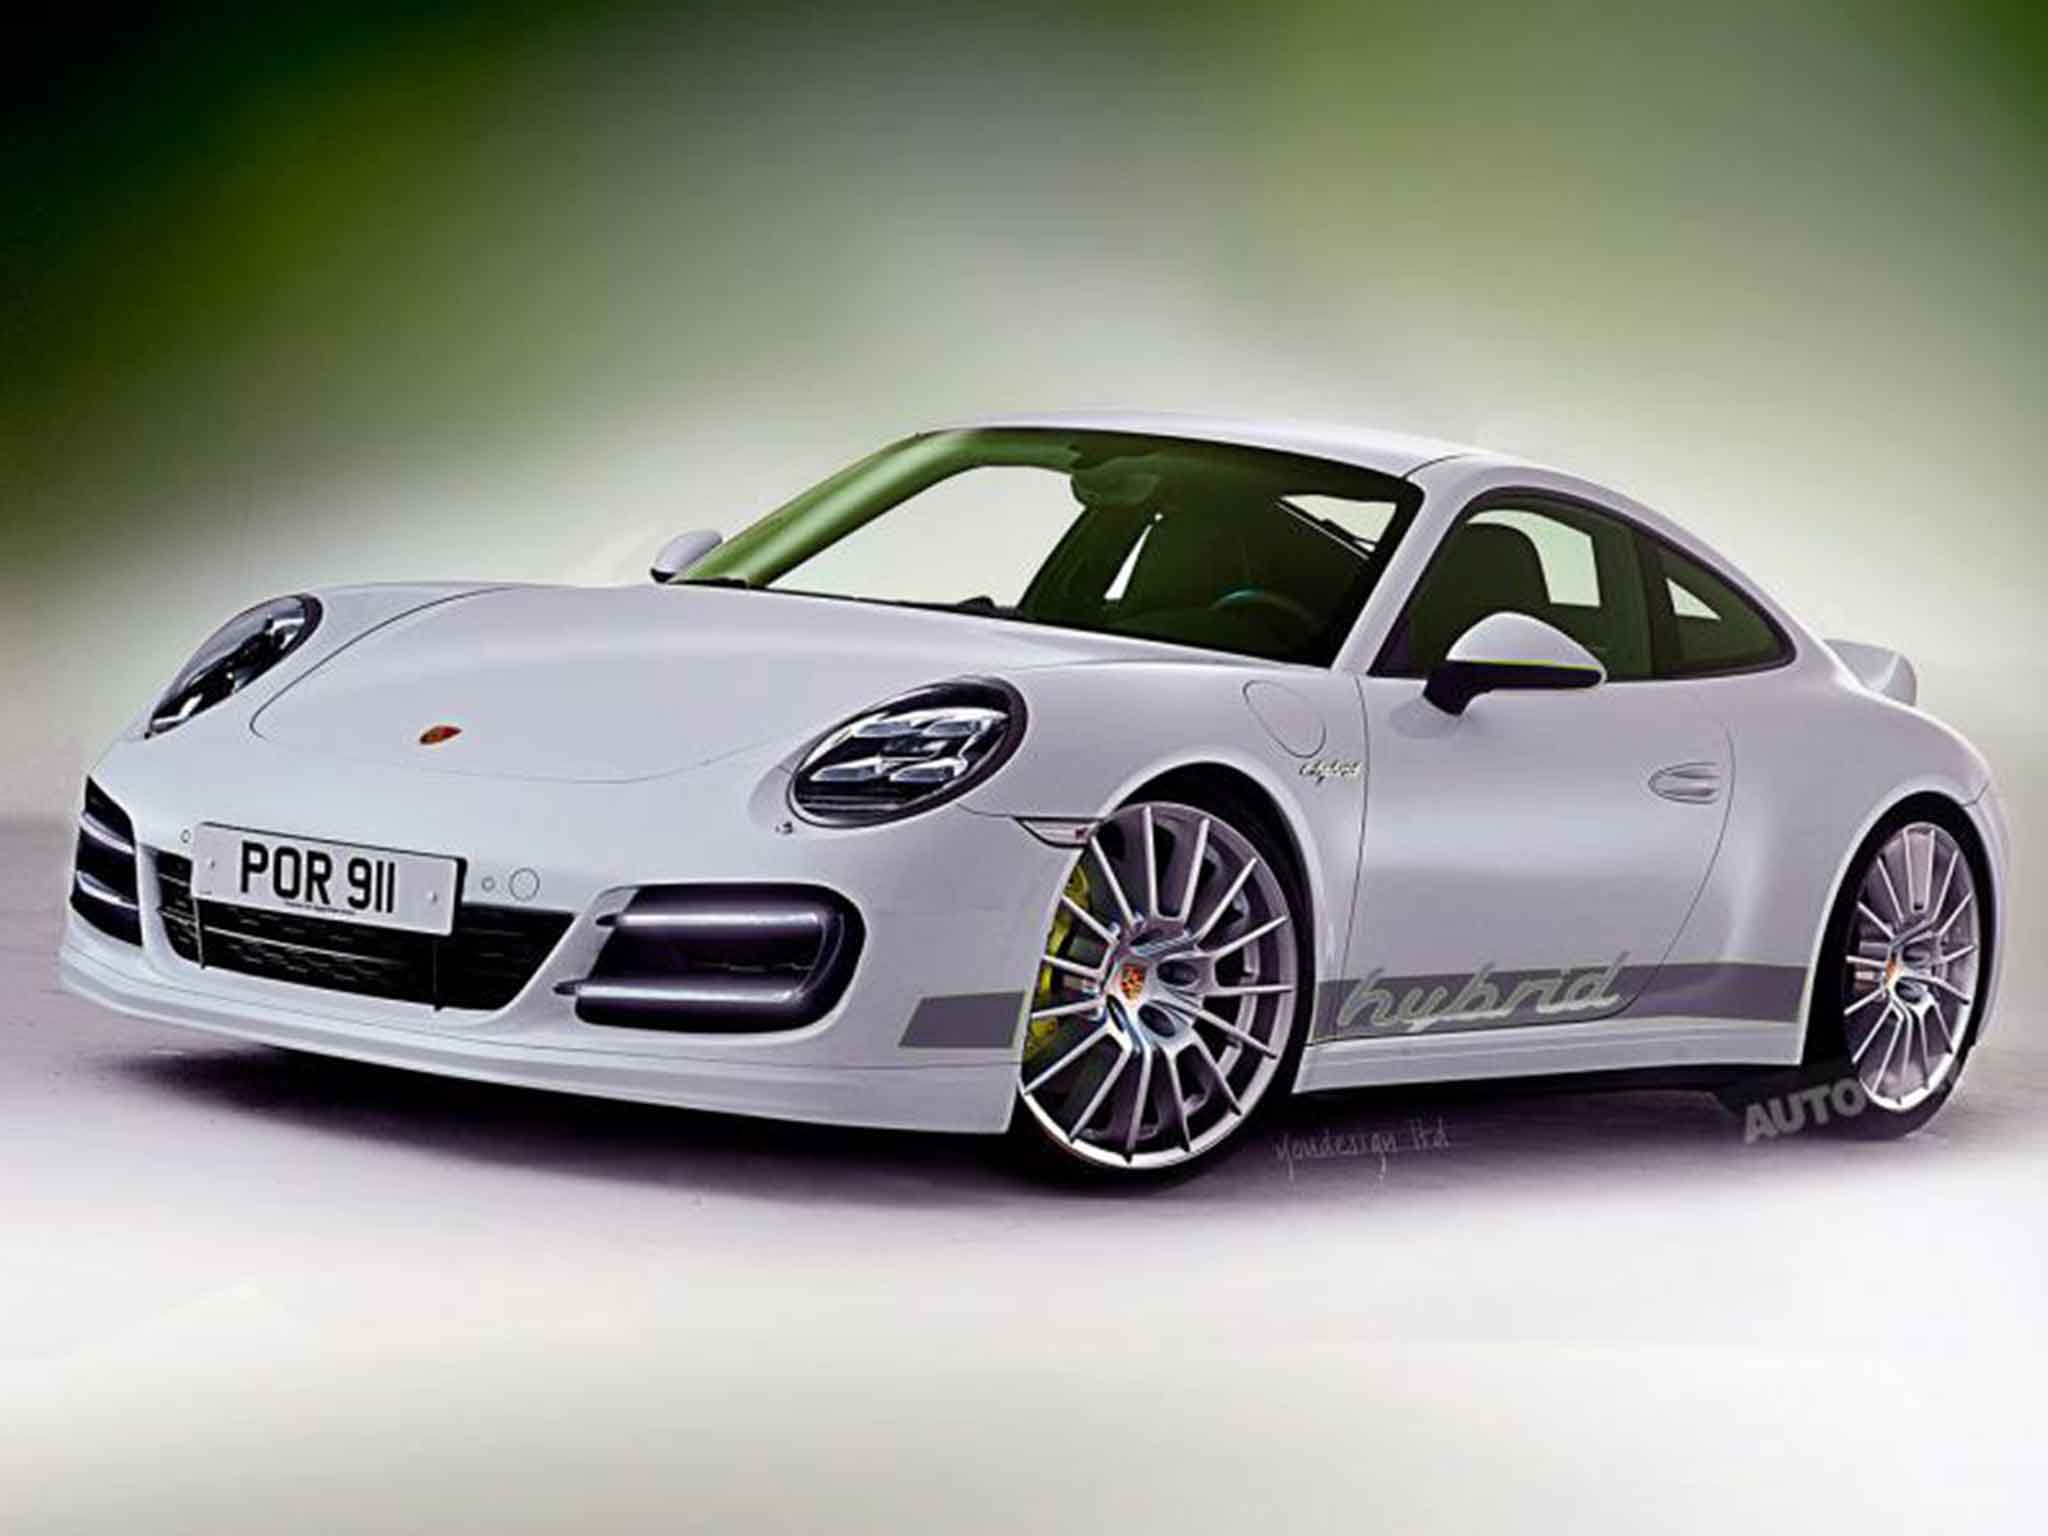 The 911 will join the Cayenne and Panamera in offering the option